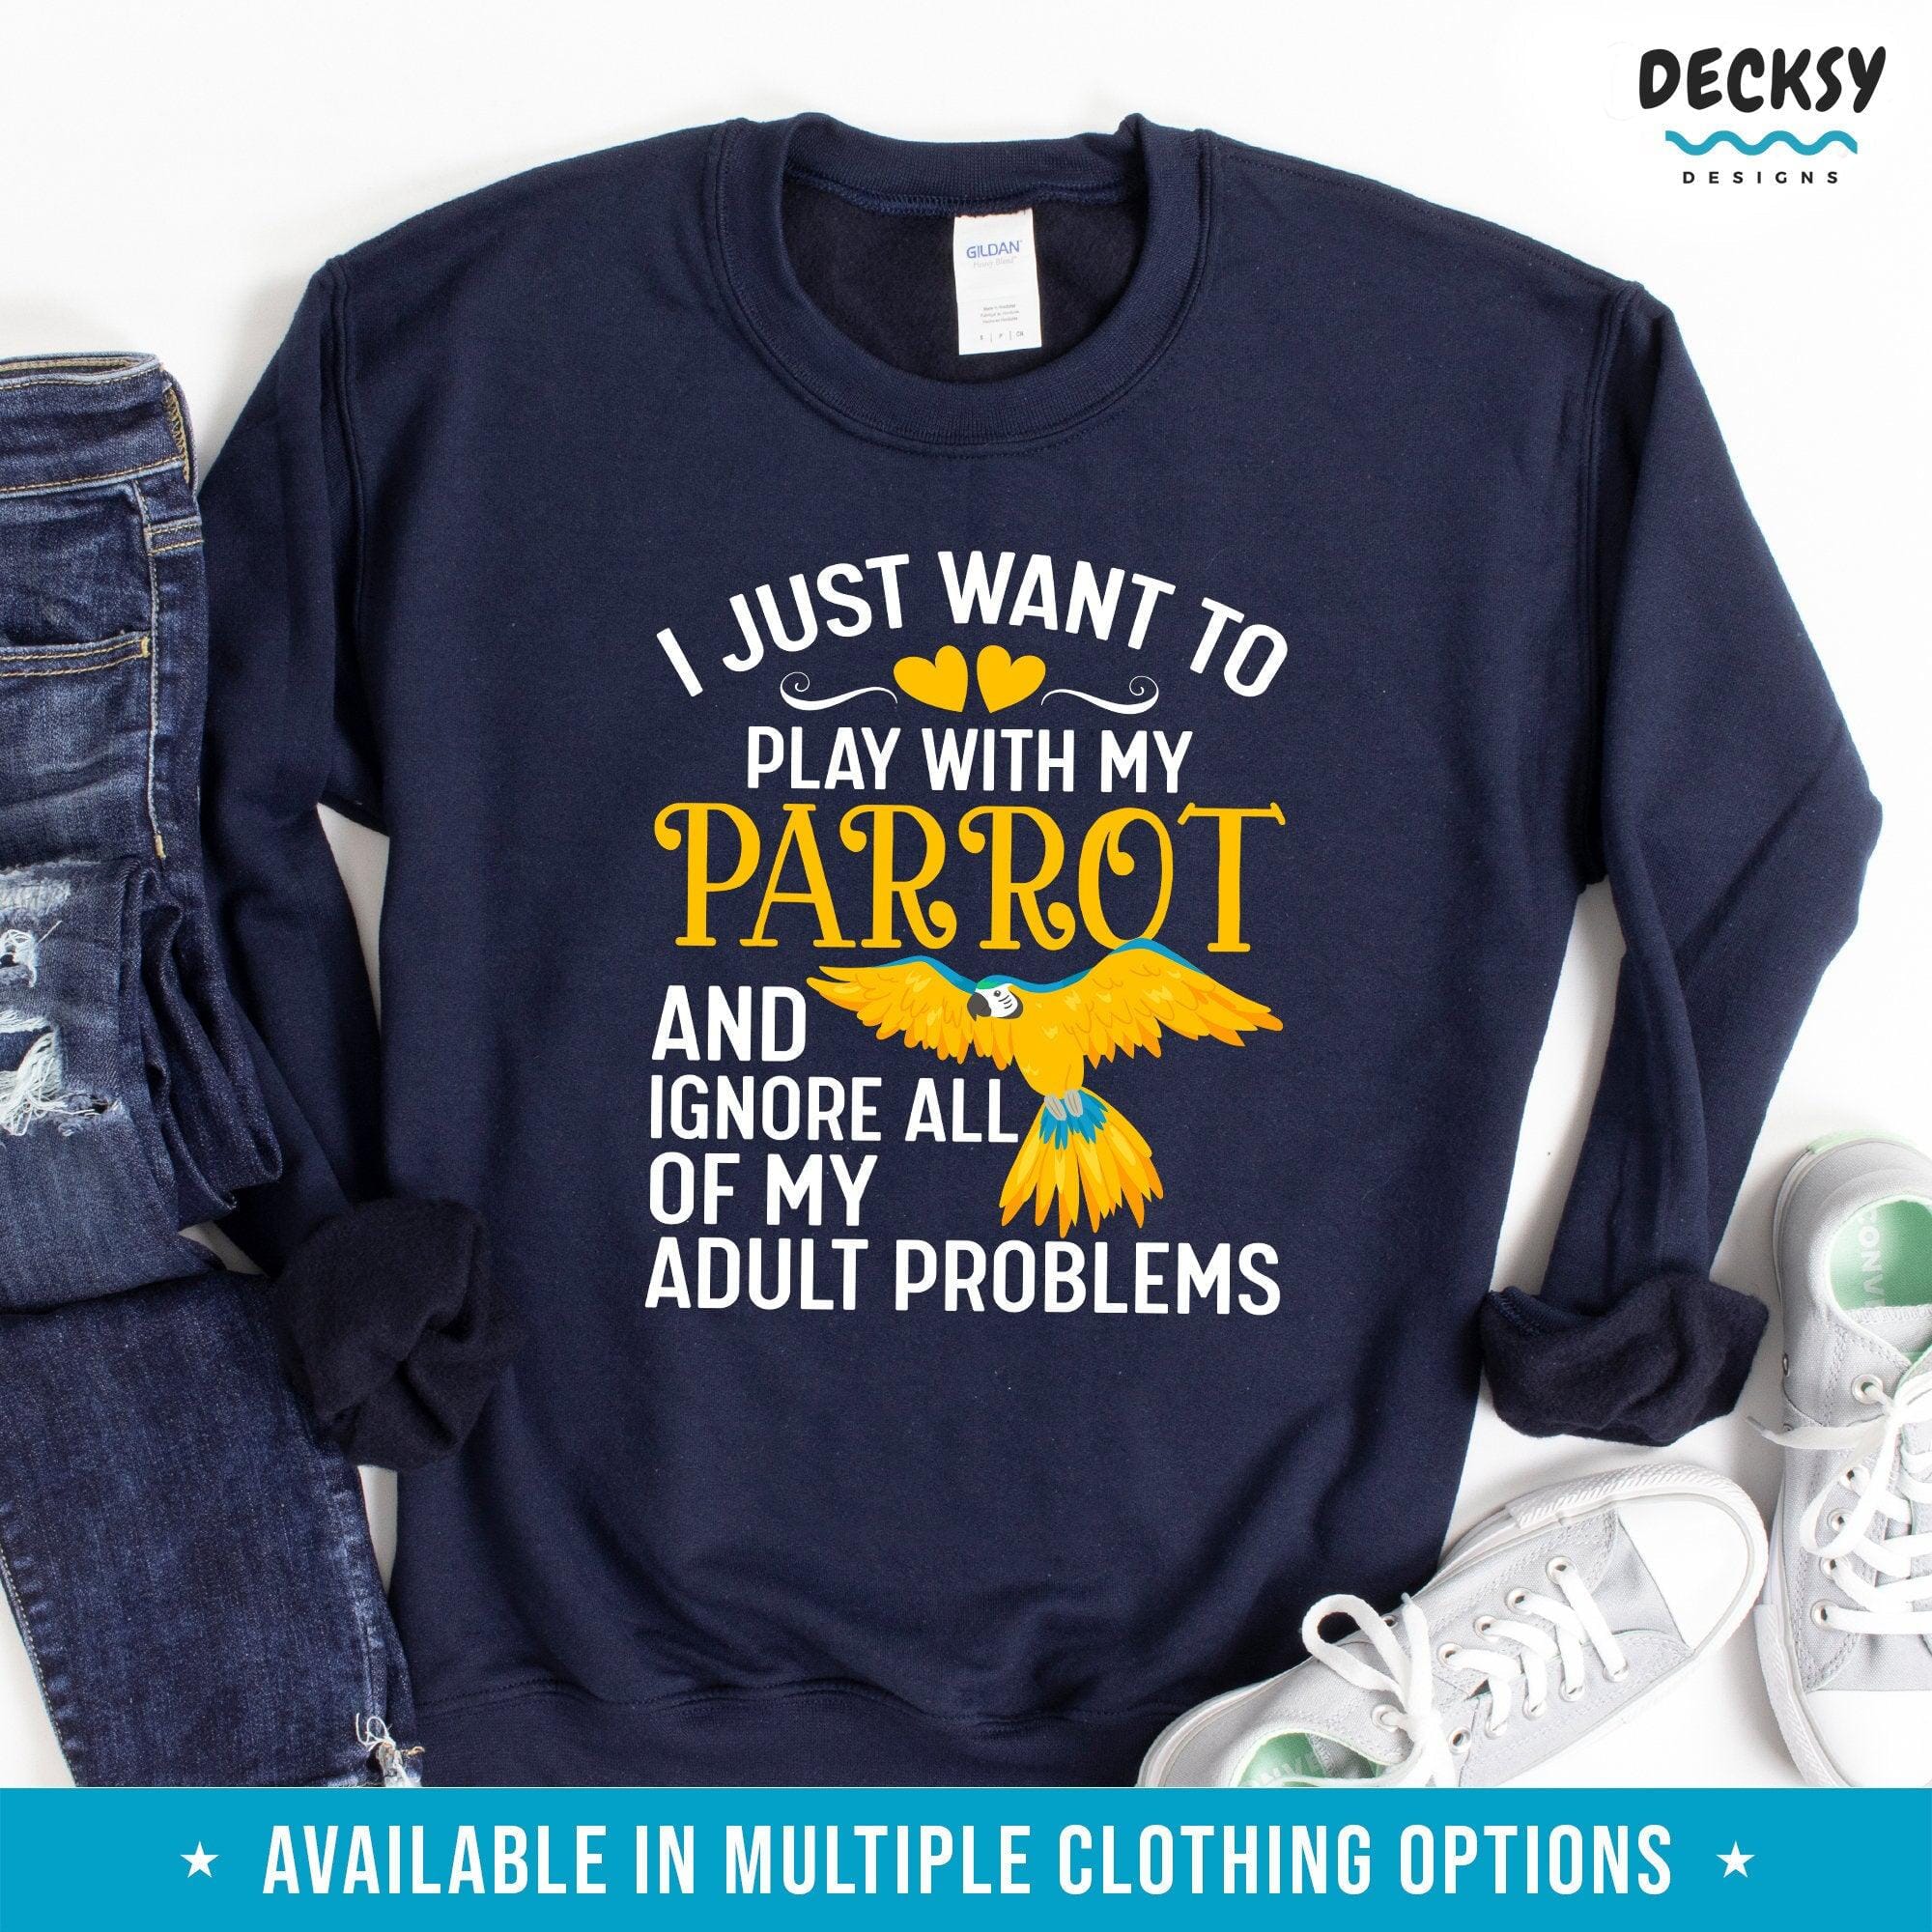 Parrot Lover Shirt, Bird Nerd Gift-Clothing:Gender-Neutral Adult Clothing:Tops & Tees:T-shirts:Graphic Tees-DecksyDesigns